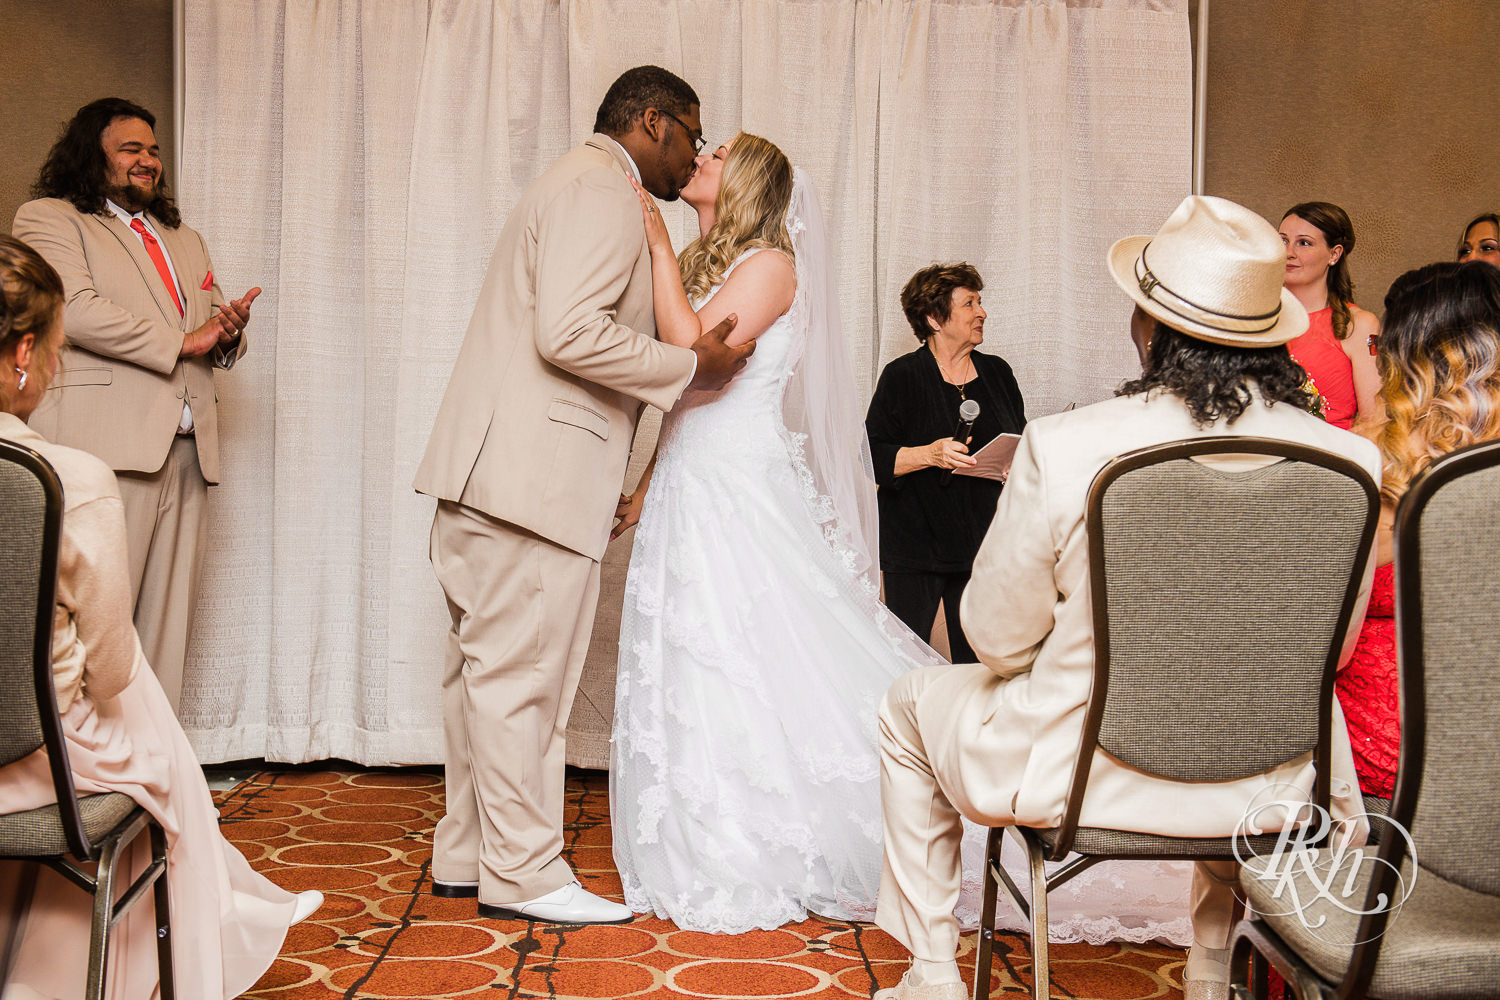 White bride and black groom kiss during wedding ceremony at North Metro Event Center in Shoreview, Minnesota.